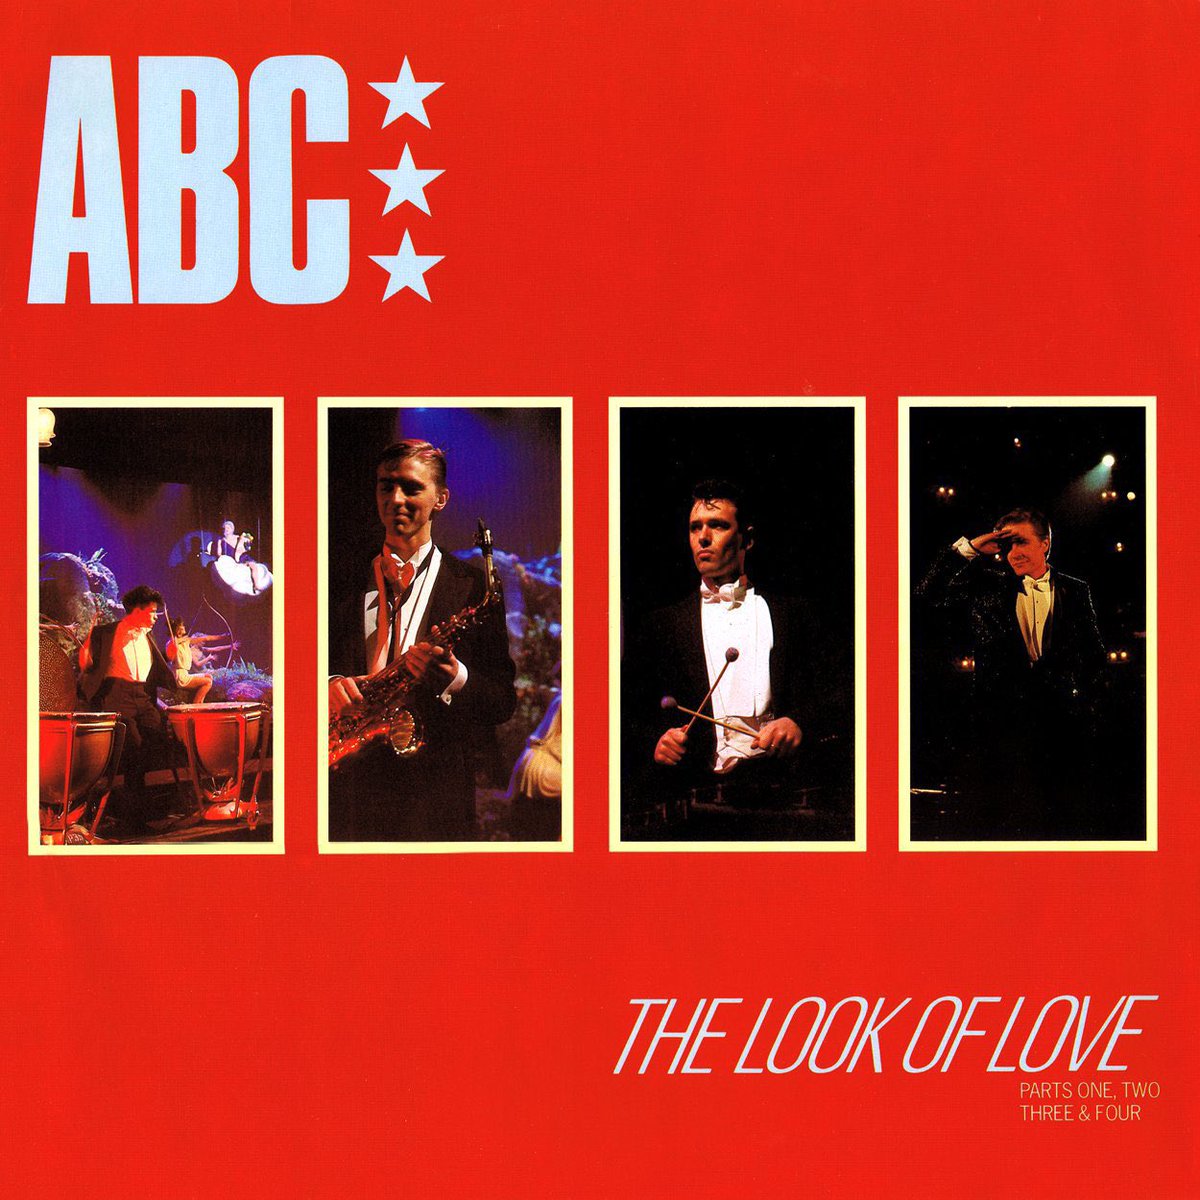 On this day in 1982, ABC released “The Look of Love” - the third single from their debut studio album “The Lexicon of Love” “I don't know the answer to that question…if I knew I would tell you.”